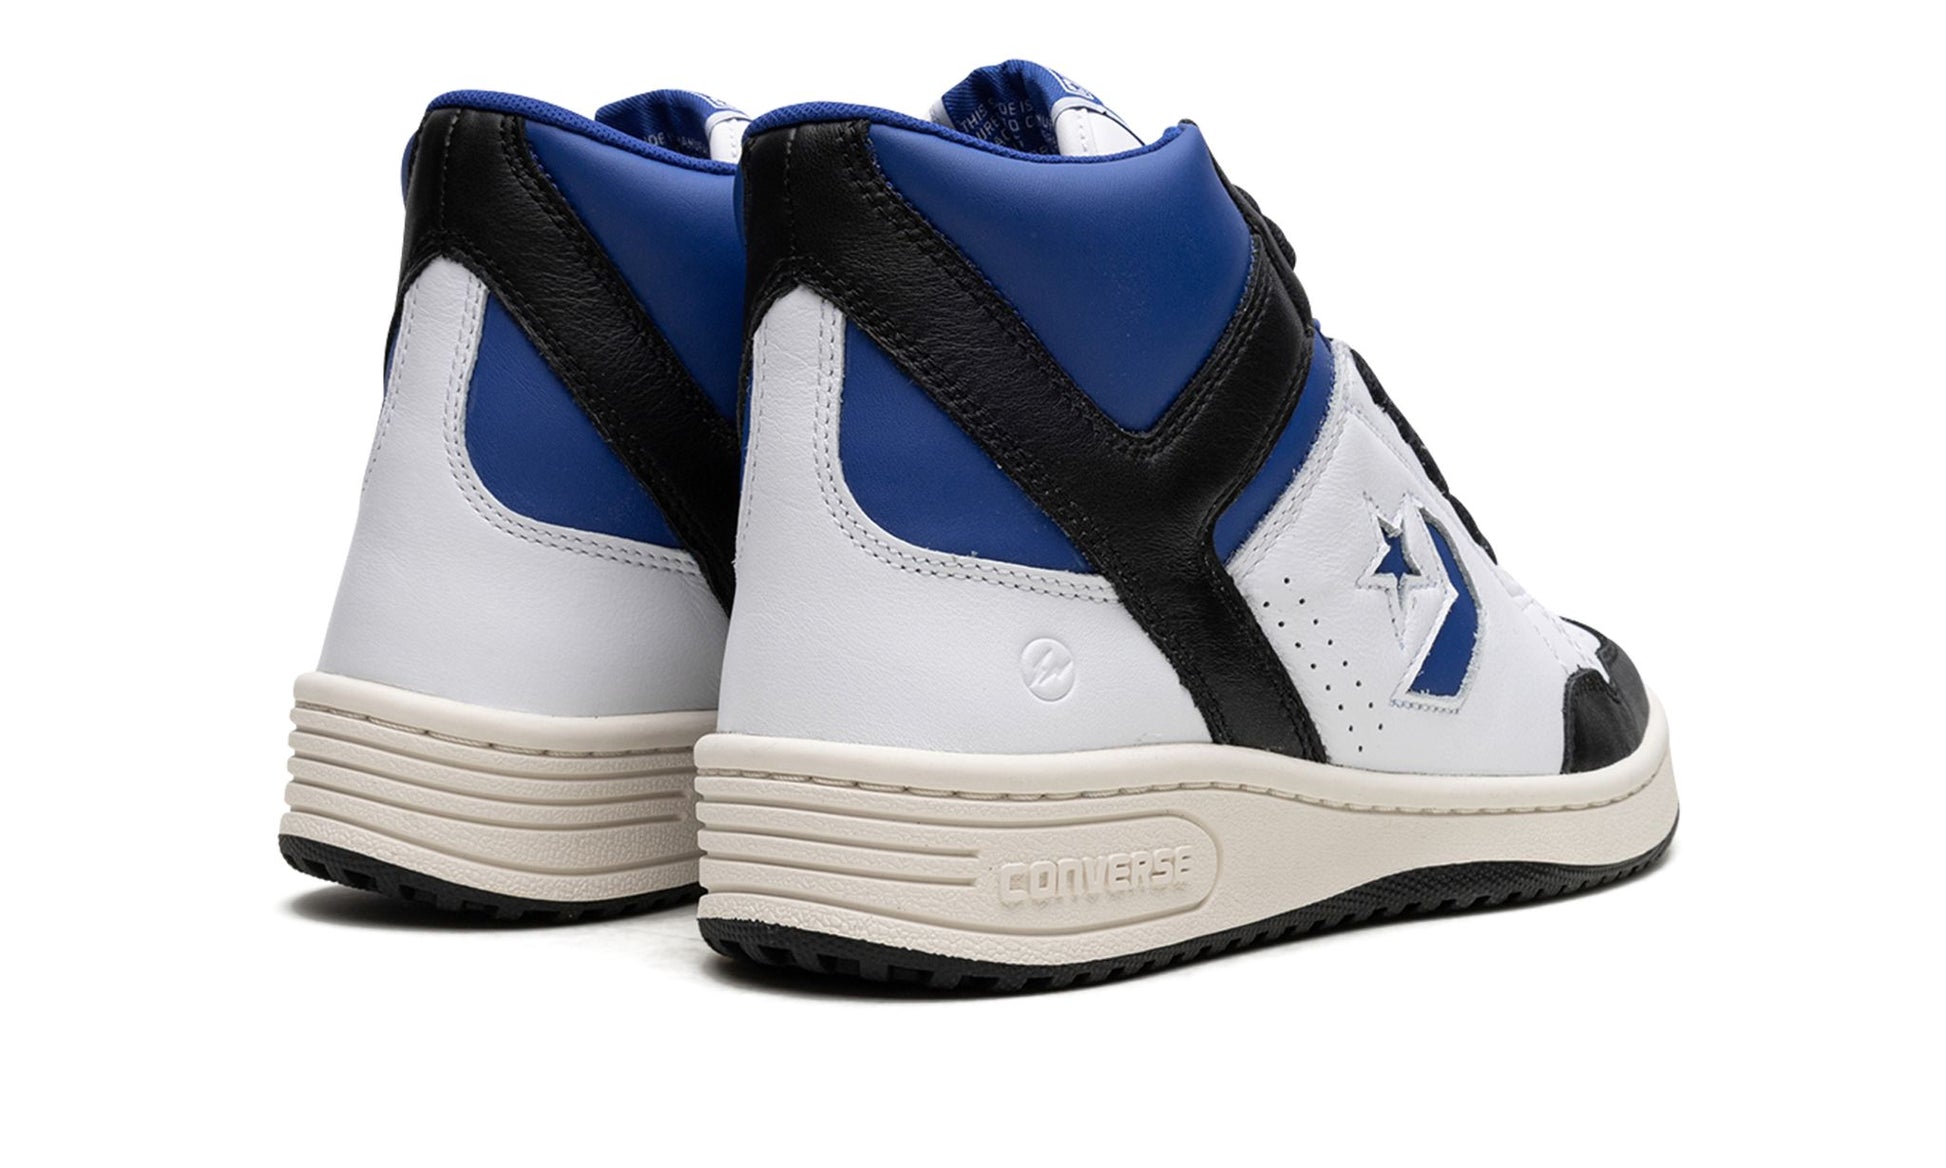 Converse and fragment design Link Up on the Weapon - Sneaker Freaker